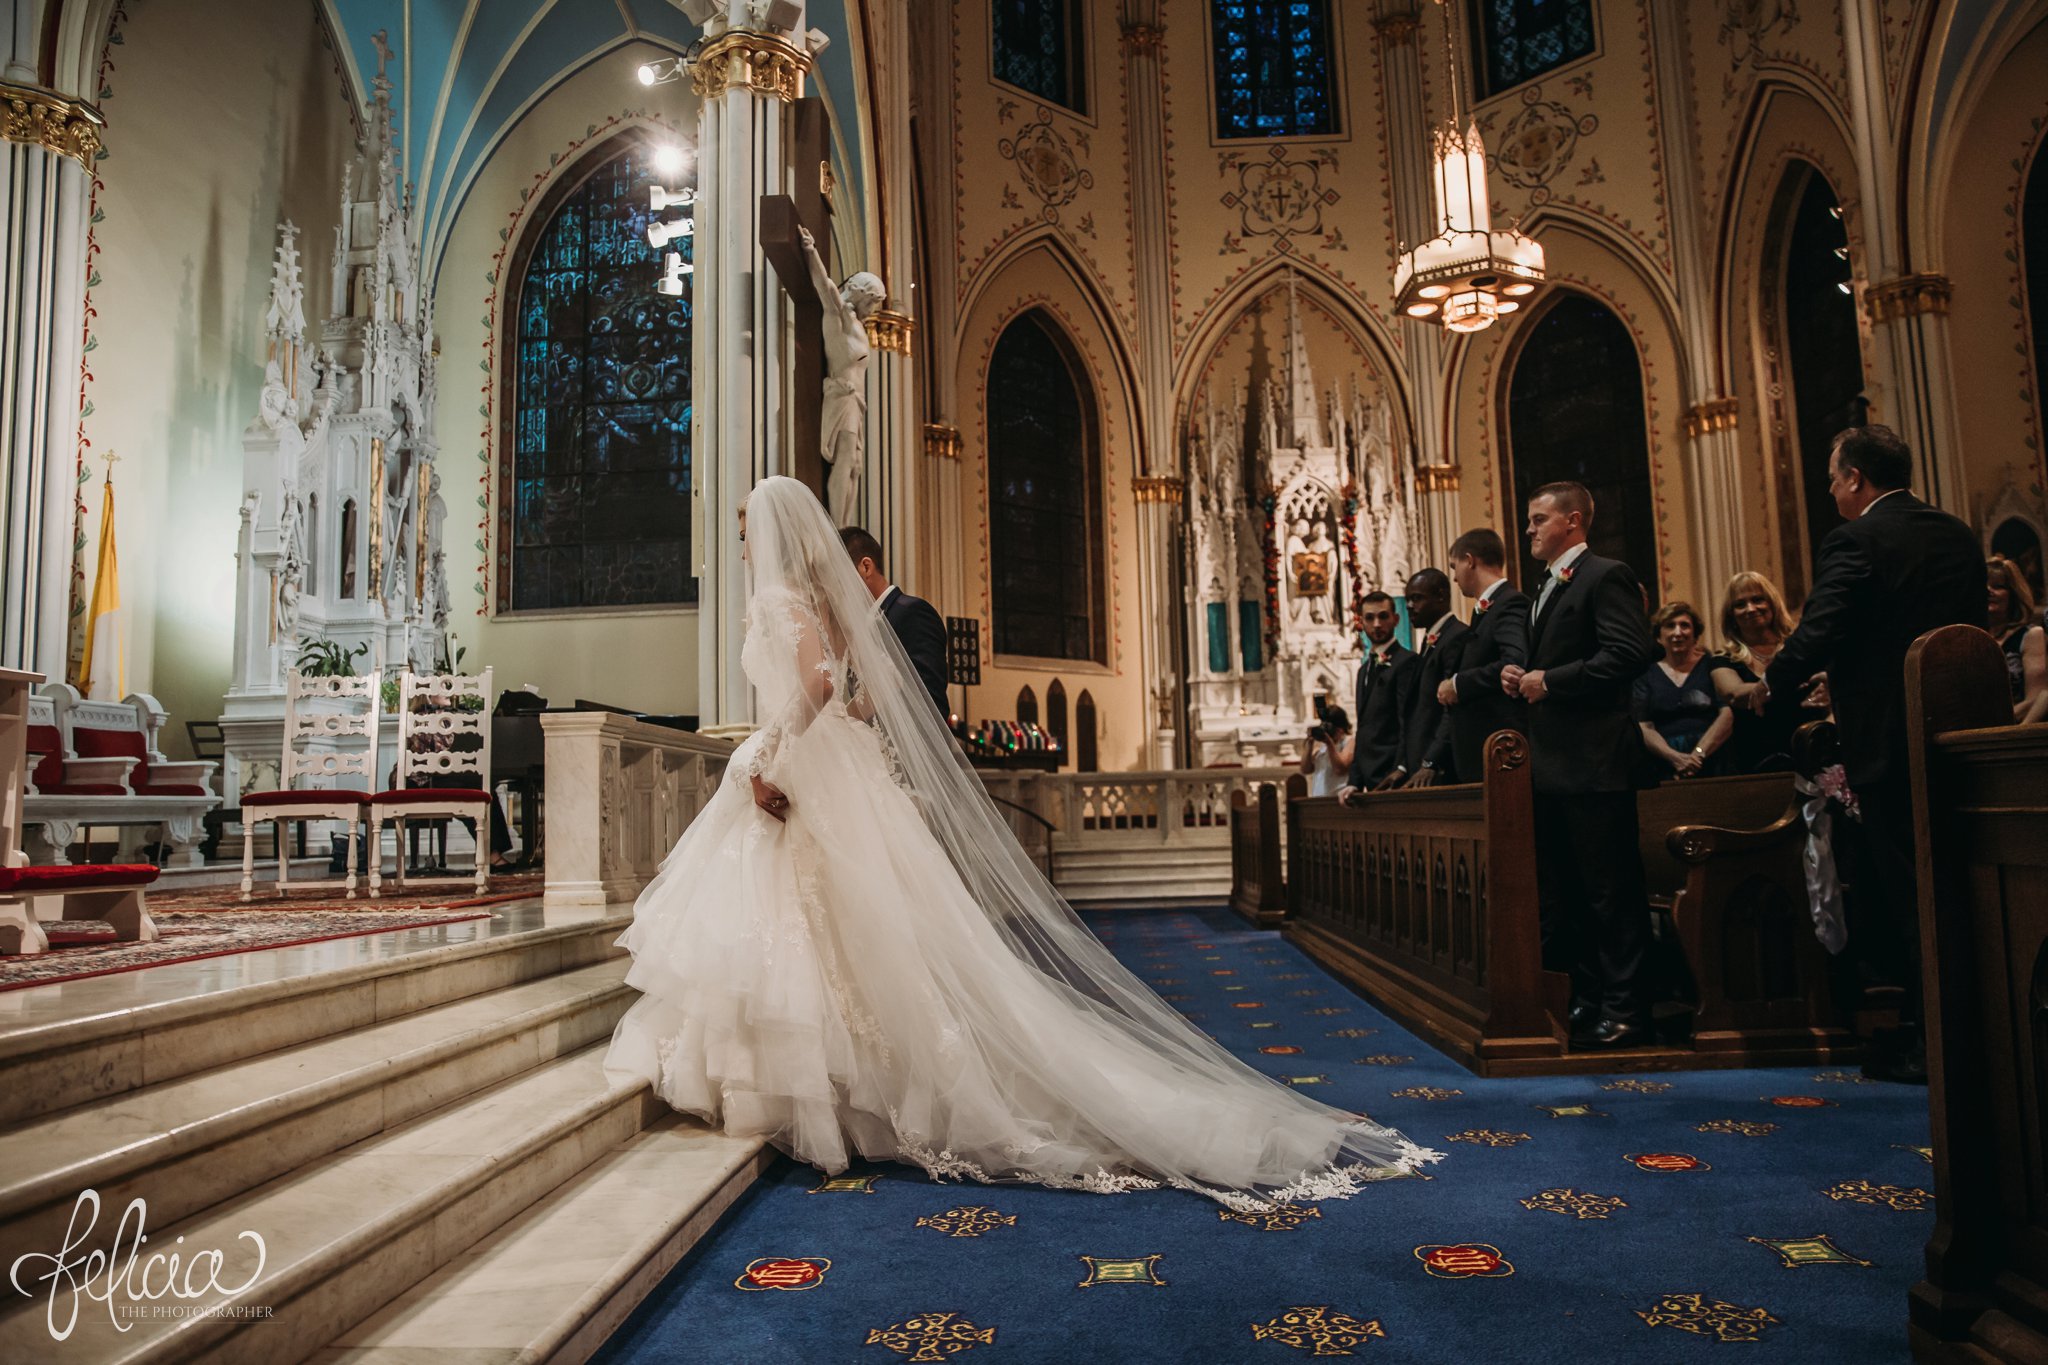 images by feliciathephotographer.com | wedding photographer | kansas city | redemptorist | classic | ceremony | bride and groom | catholic | our lady of perpetual help | long train | lace dress | flowing veil | 